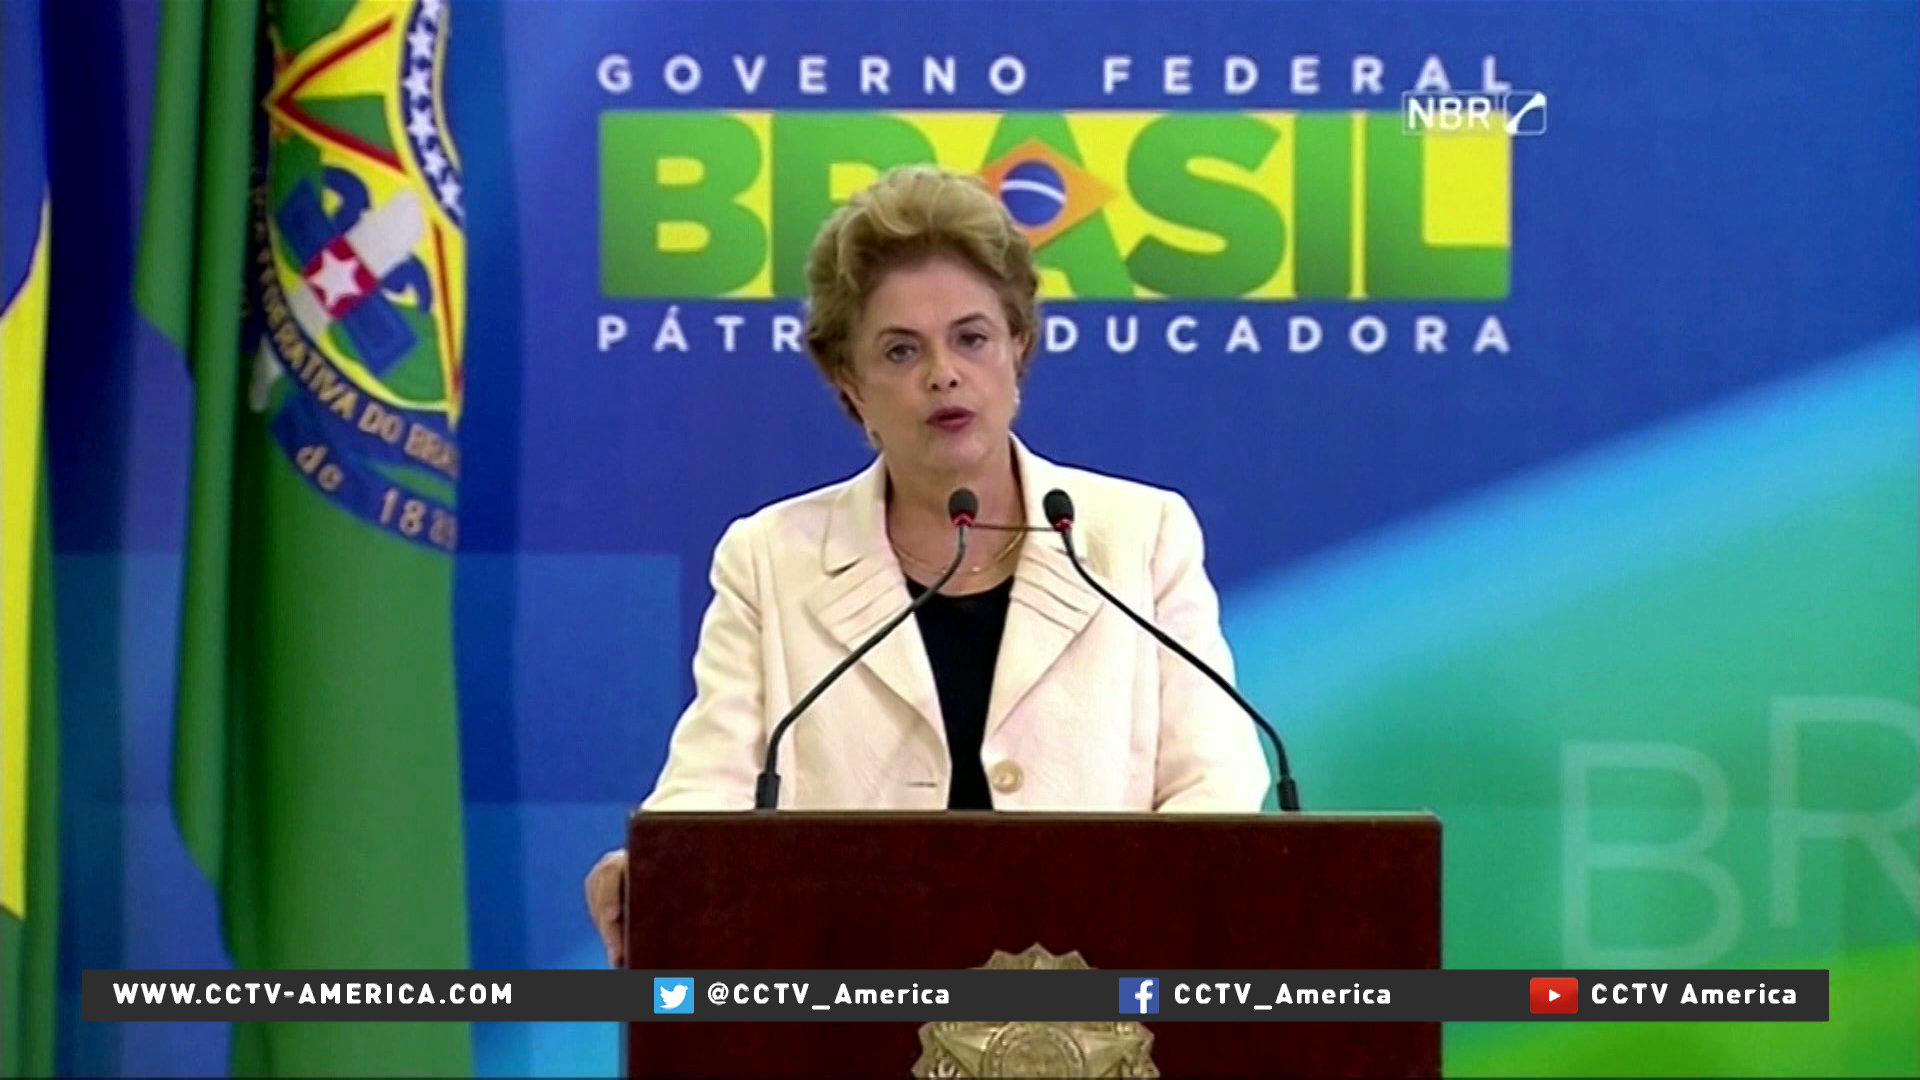 President Rousseff loses support from Brazil’s largest political party